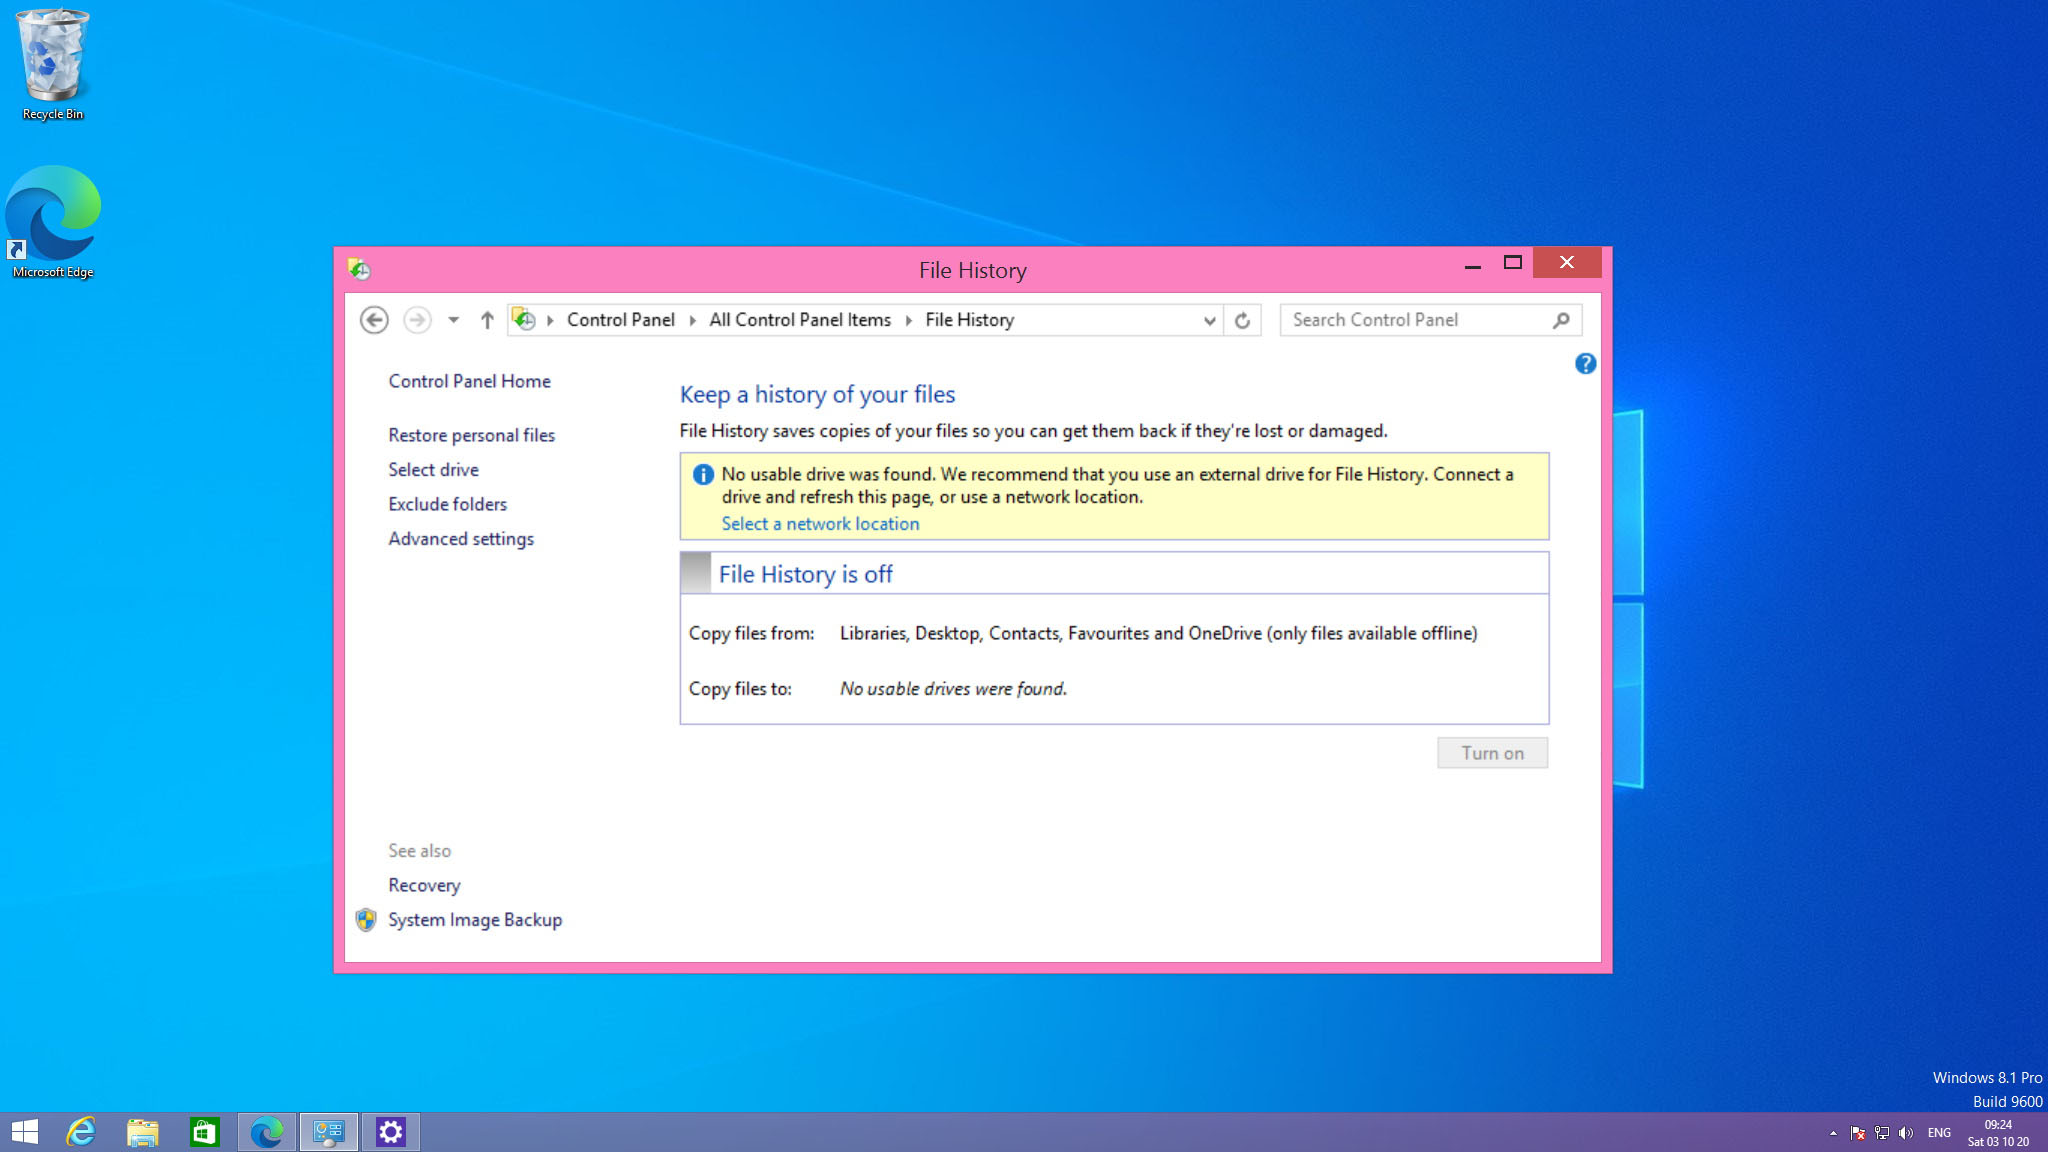 Recover deleted files on Windows 8 using File History option